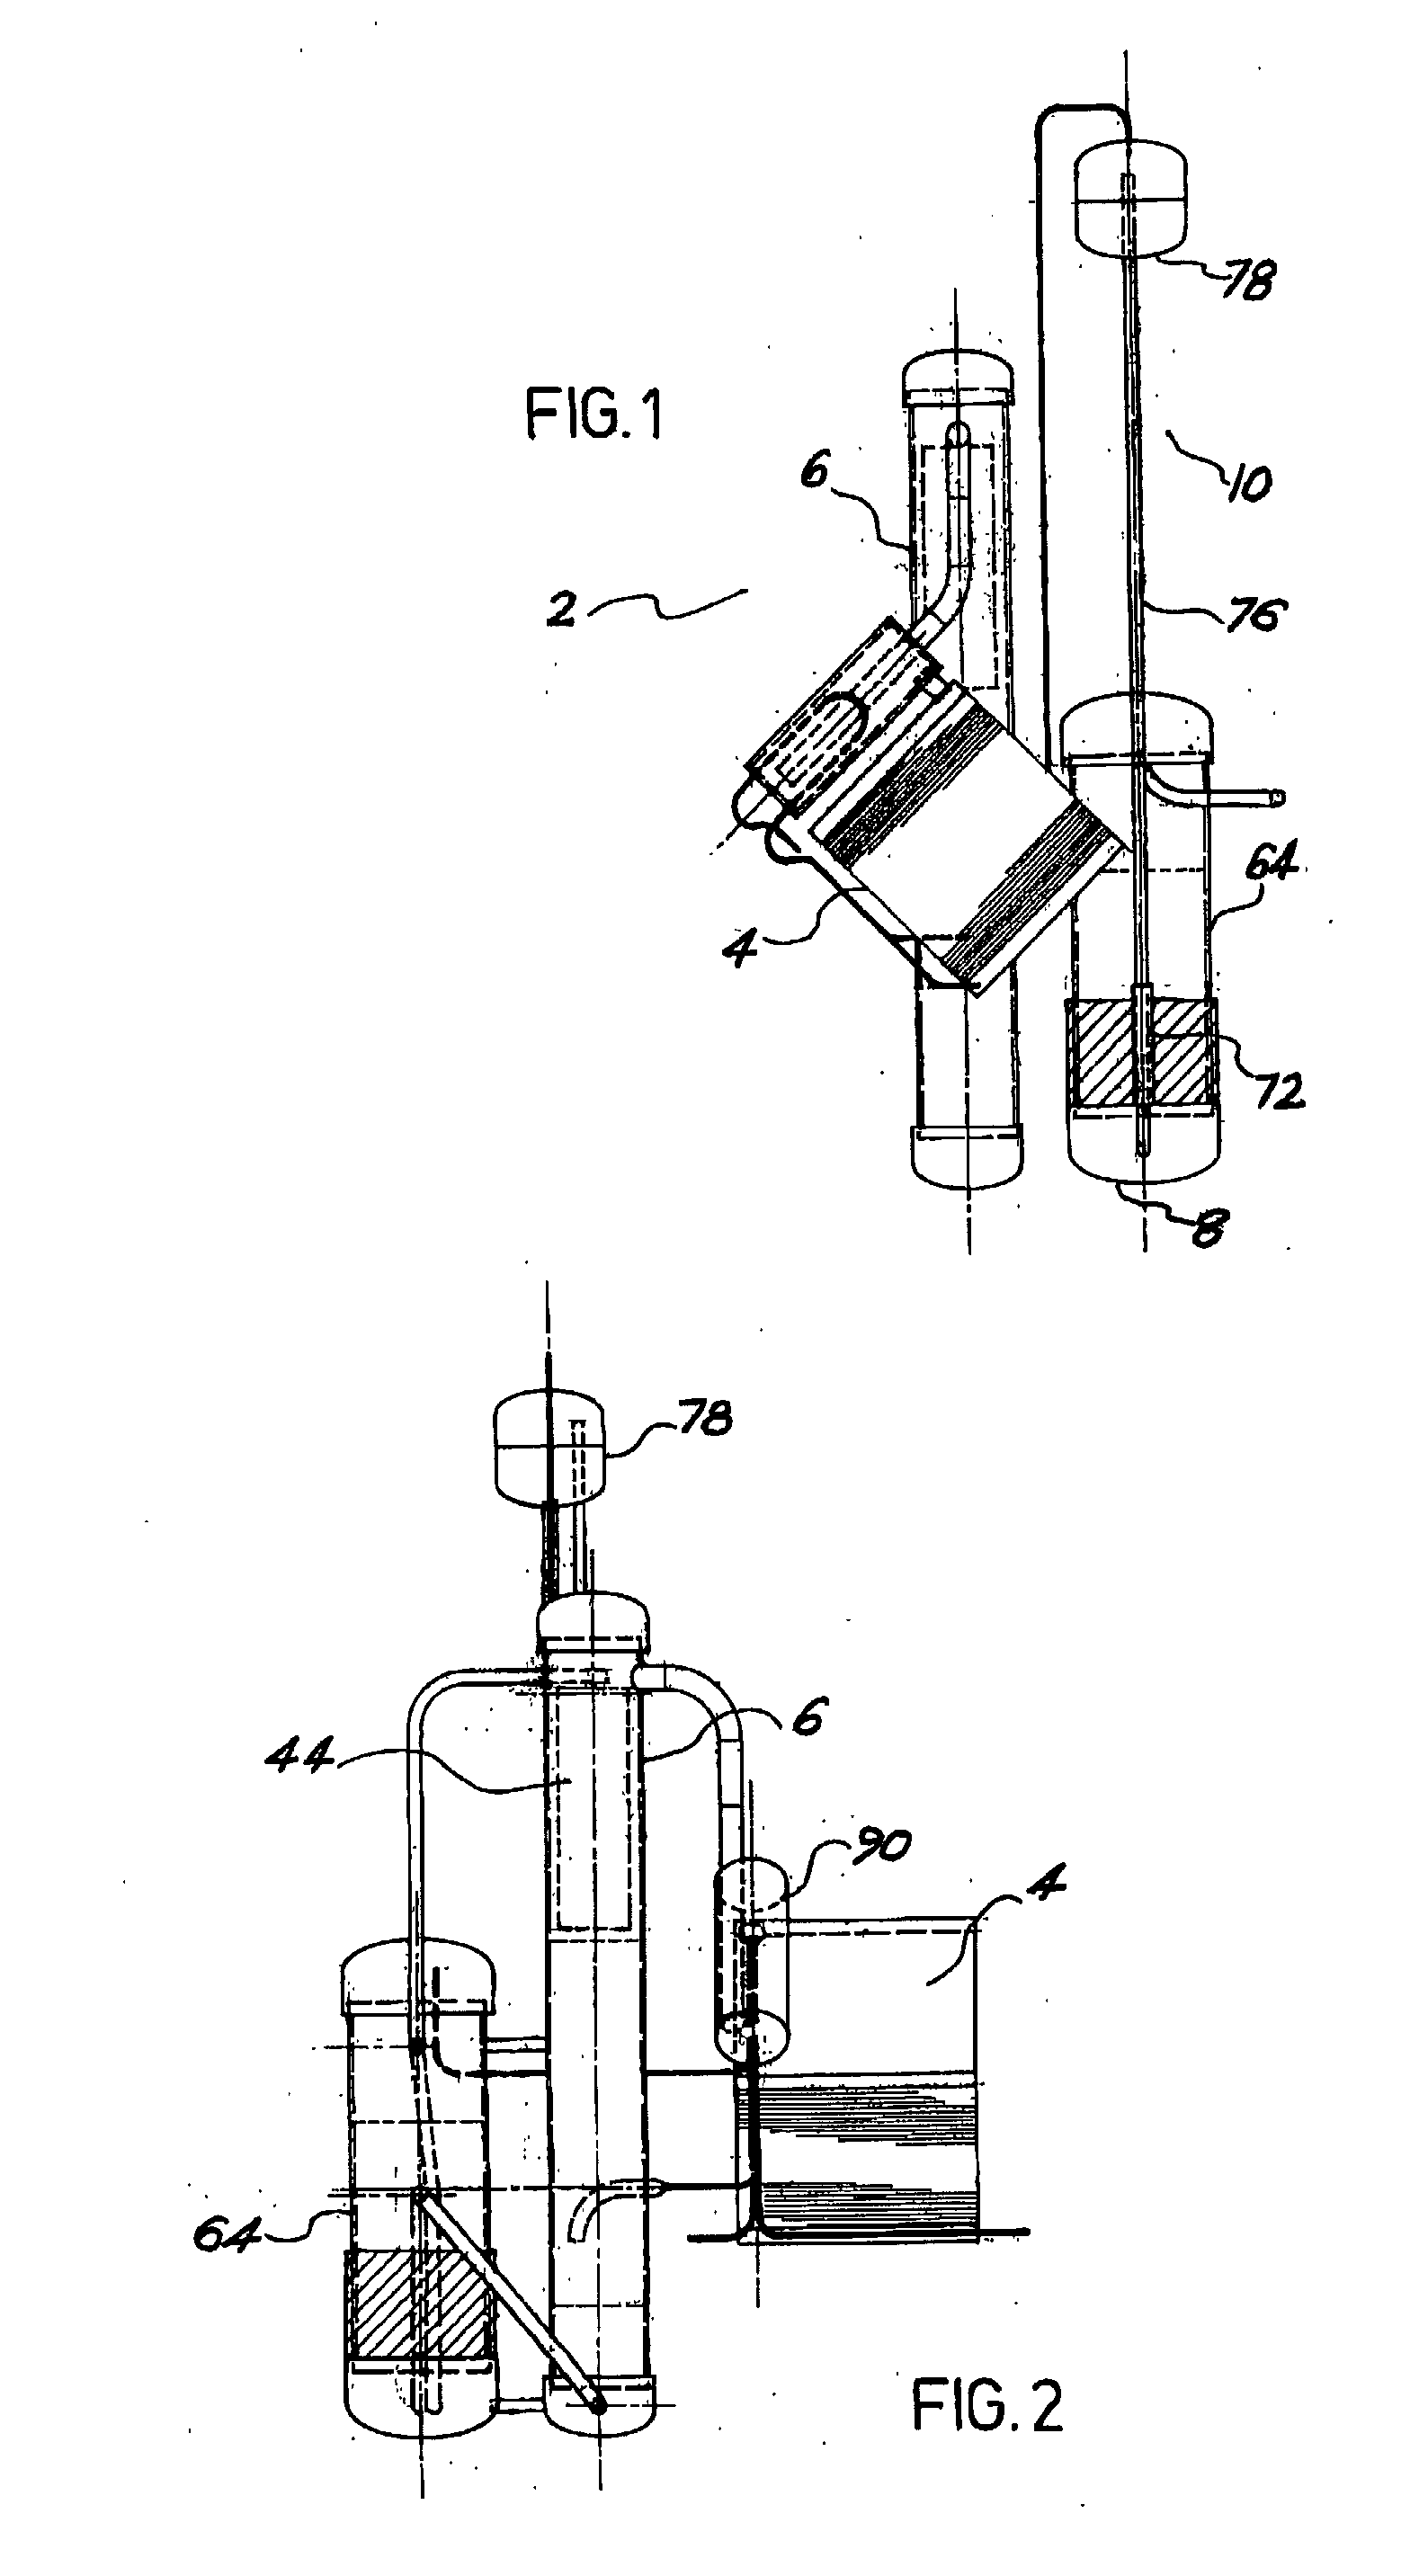 Single Cycle Apparatus for Condensing Water from Ambient Air